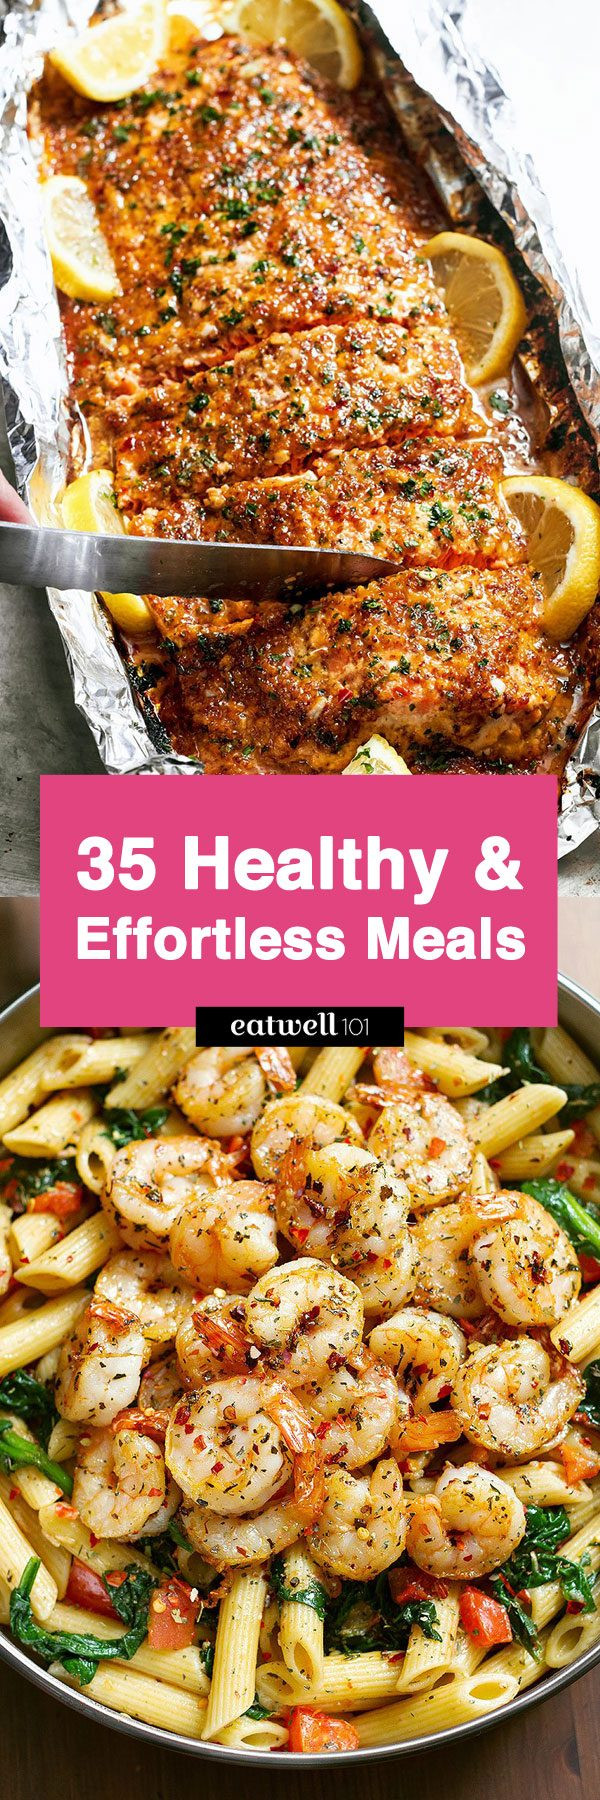 Easy Healthy Dinners
 43 Low Effort and Healthy Dinner Recipes — Eatwell101